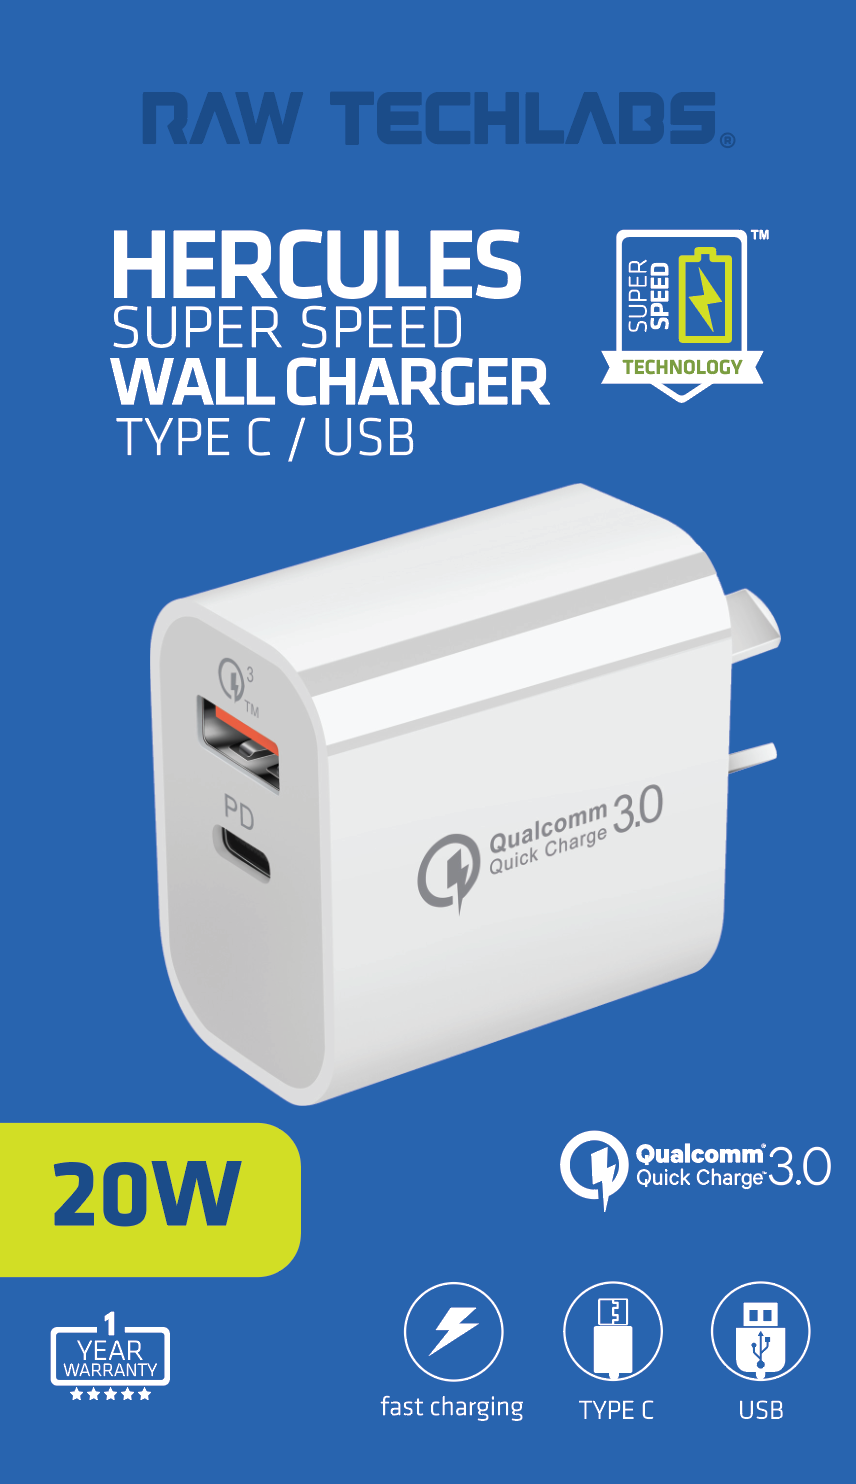 HERCULES SUPER SPEED WALL CHARGER 20W USB AND TYPE C (WHITE)